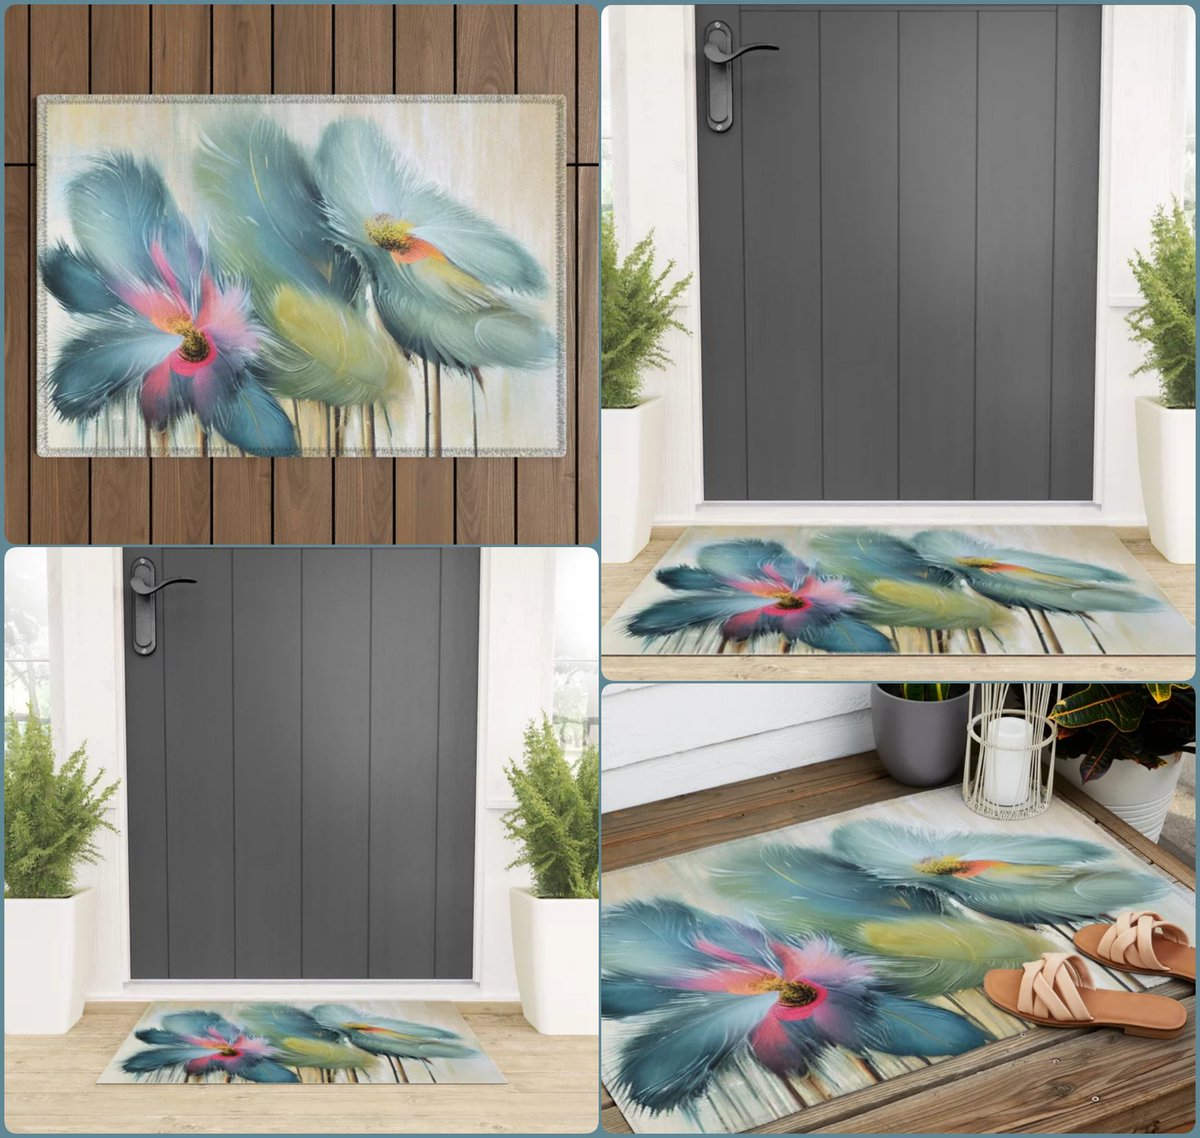 Charming Adventure Welcome Mat & Rugs~by Art_Falaxy~
~Refreshingly Unique~
#artfalaxy #art #rugs #mats #homedecor #society6 #Society6max #swirls #modern #trendy #accents #floorrugs #welcome #outdoorrugs

society6.com/product/charmi…